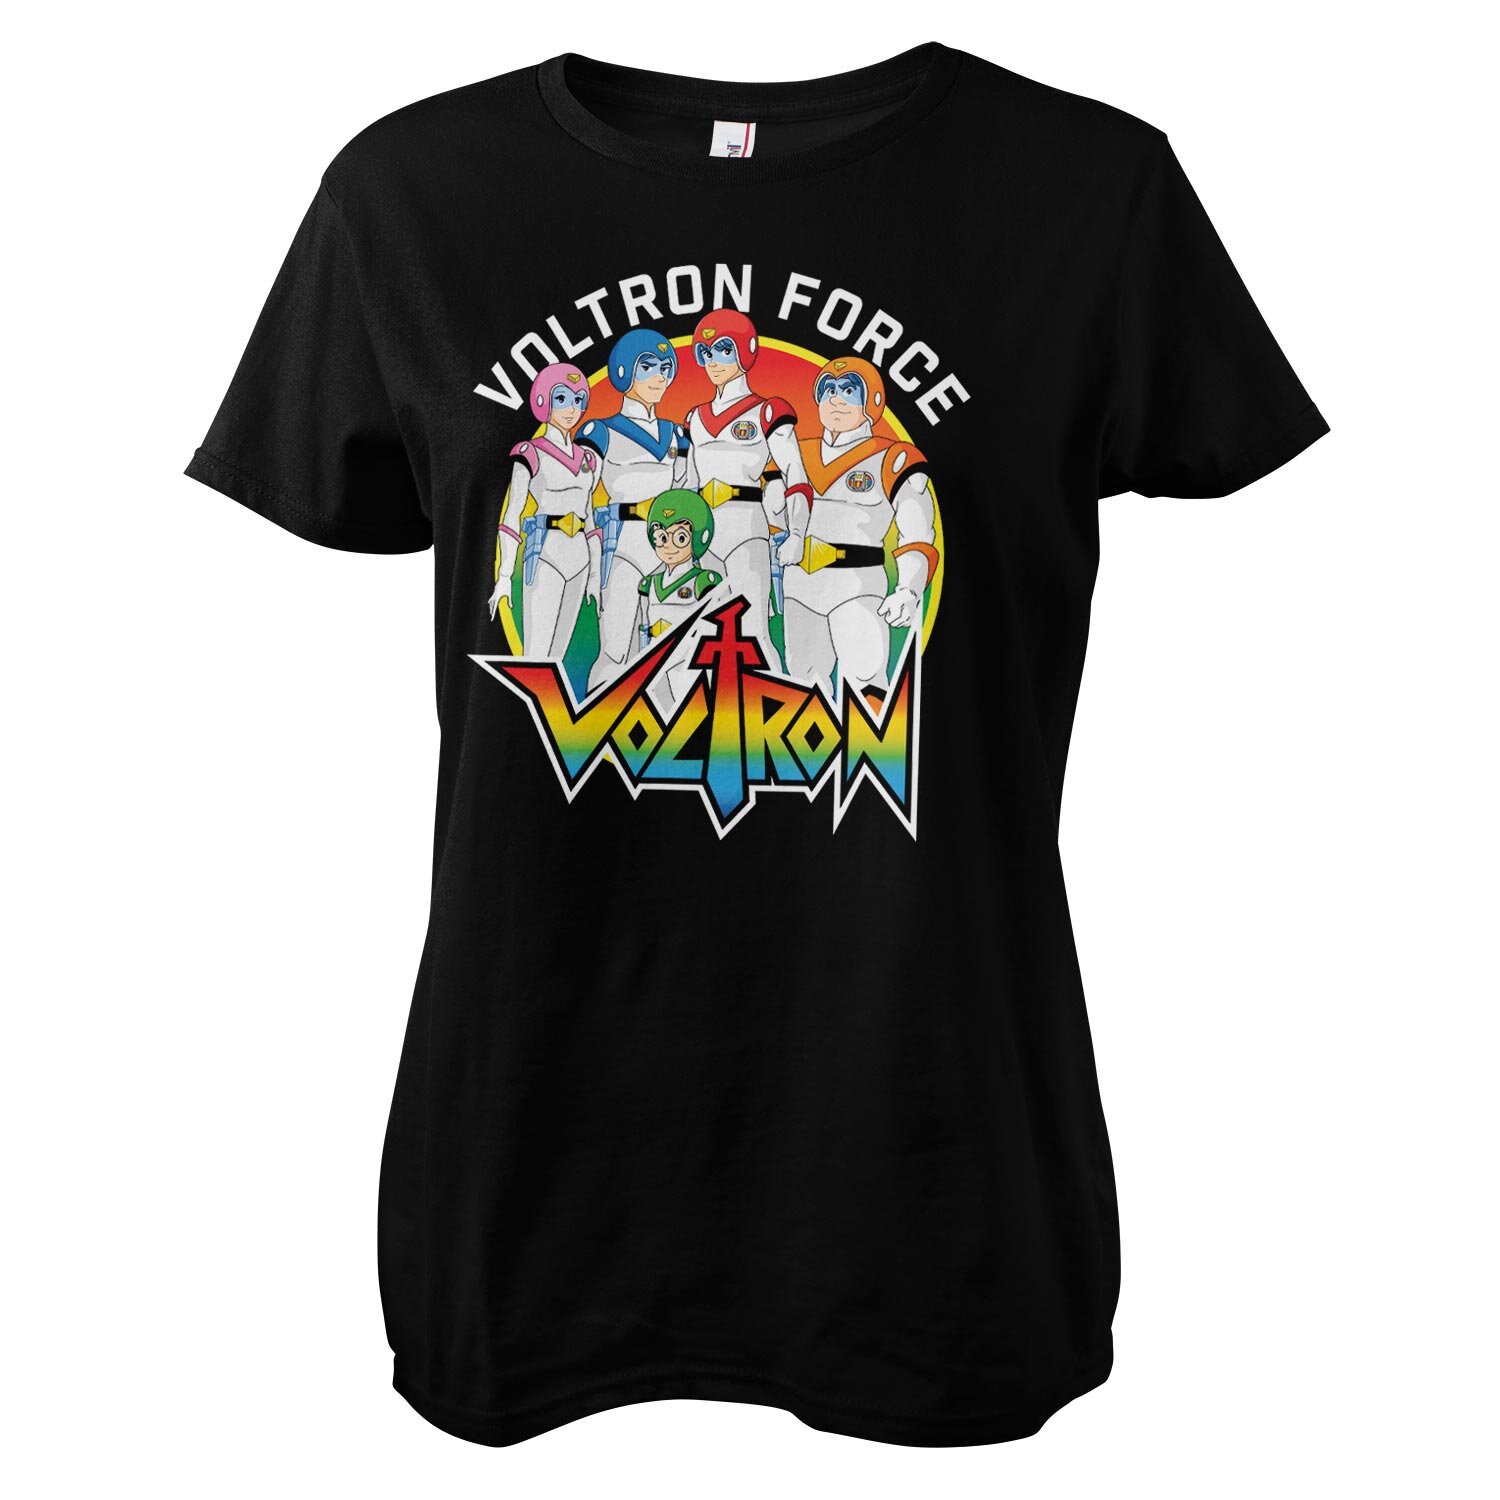 Voltron Force Girly Tee